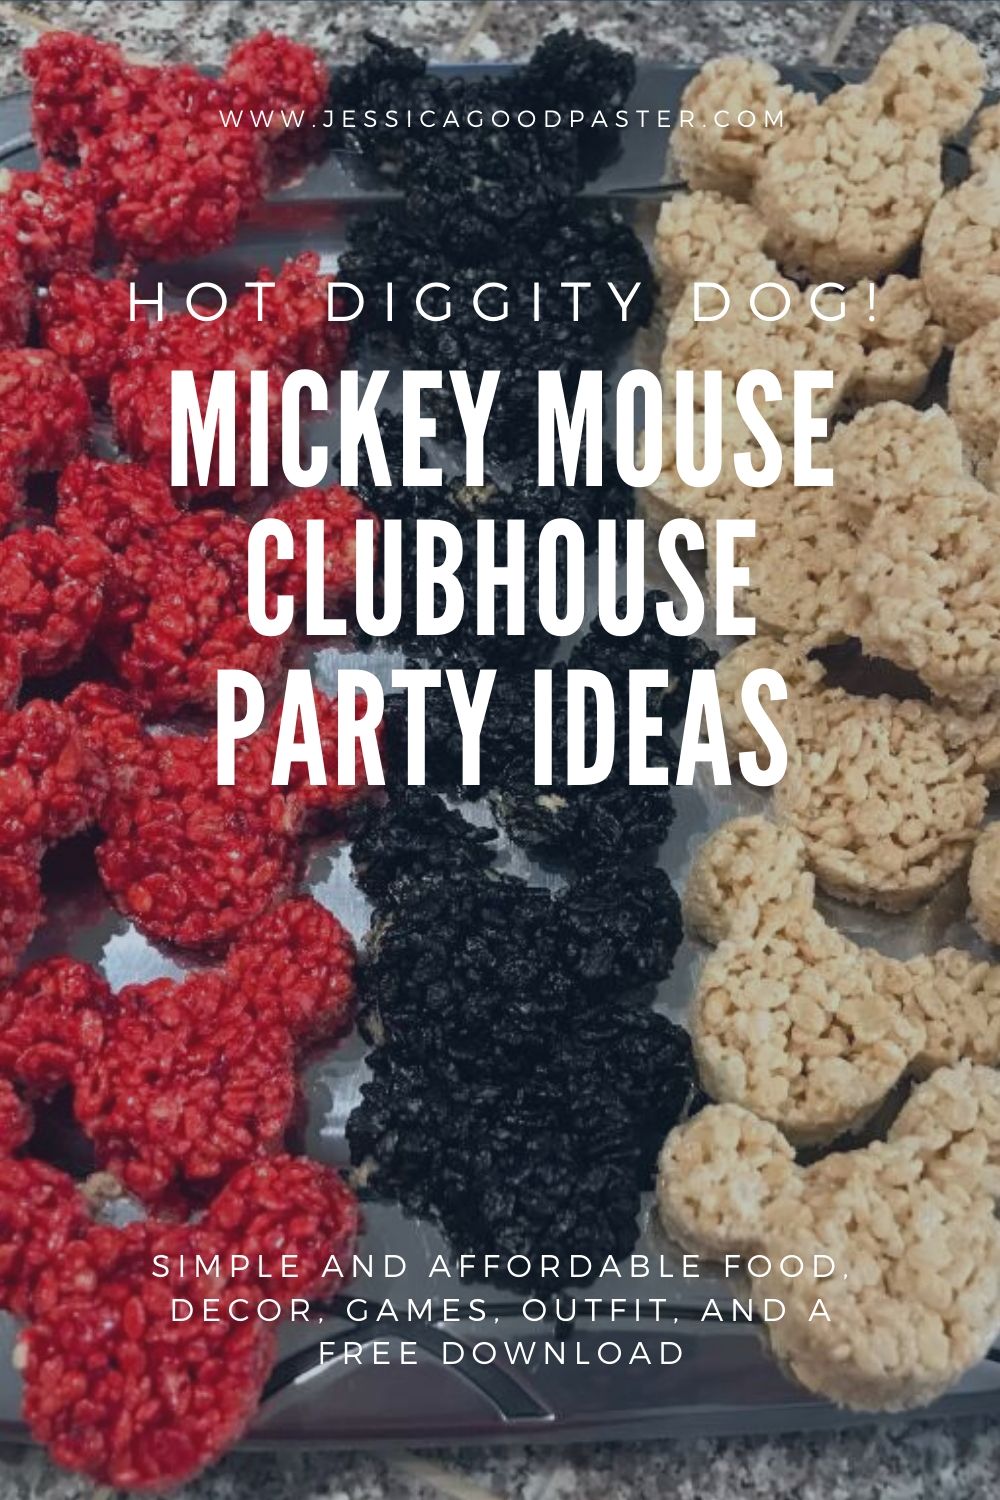 How to Host an Amazing Mickey Mouse Clubhouse Party on a Budget | Tons of affordable options for Mickey or Minnie parties including food ideas, decorations, outfits, games, party supplies, and free printables! Your Mickey Mouse Clubhouse fan will have a great birthday ! #mickeyparty #mickeymouse #mickeymouseparty #minnieparty #birthday #mickeymouseclubhouse #mickeyprintables